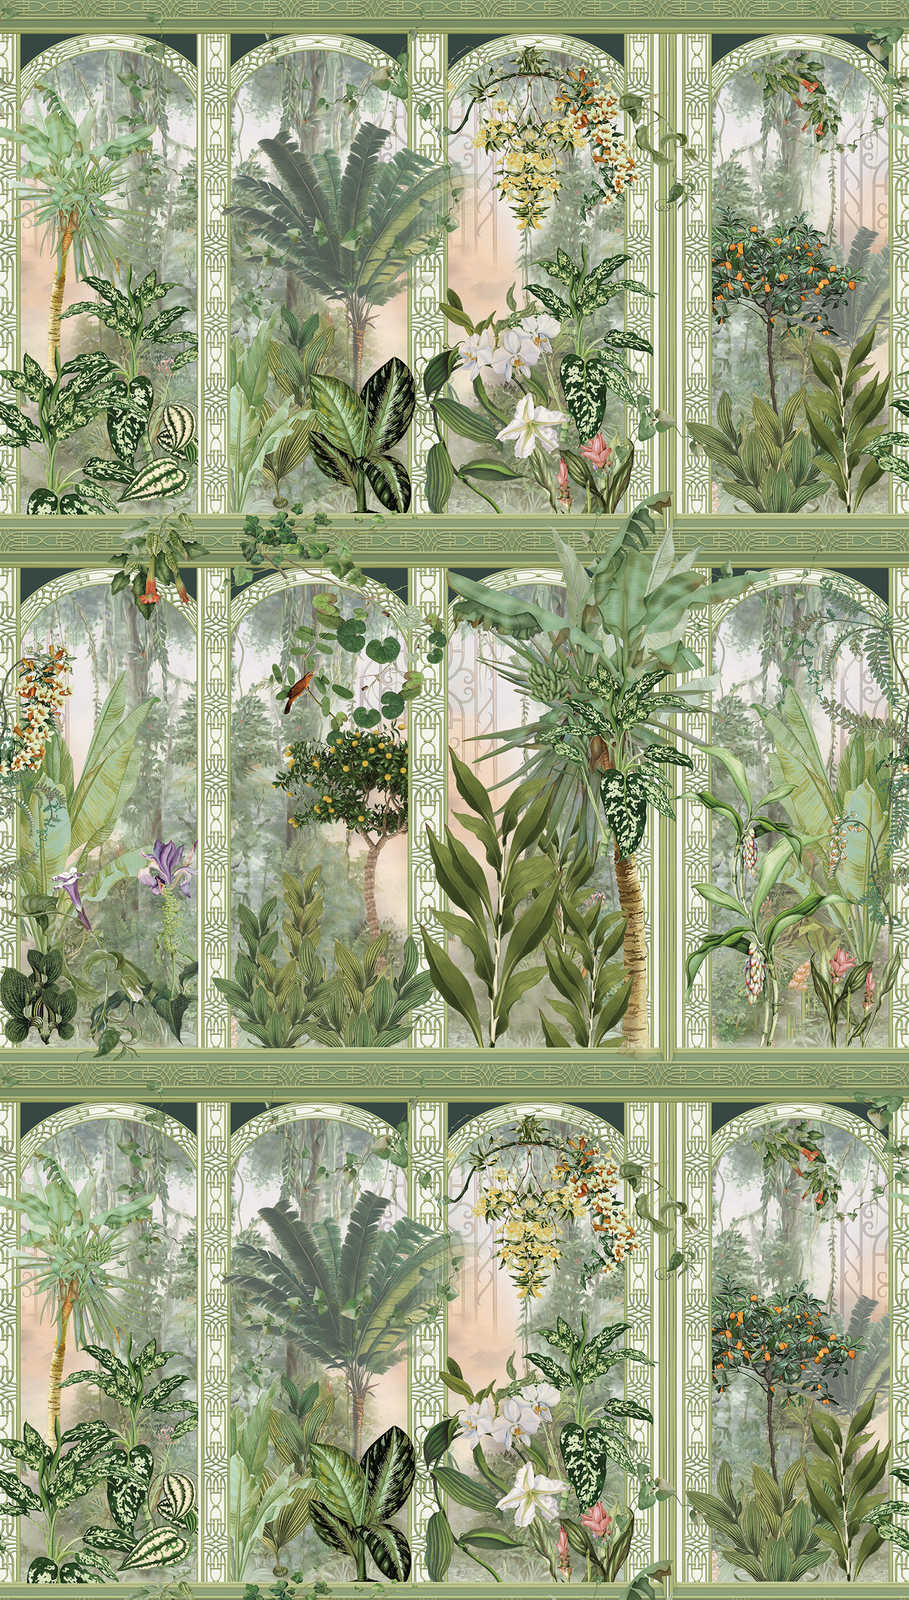             Wallpaper jungle motif with large leaves and flowers - green, brown, white
        